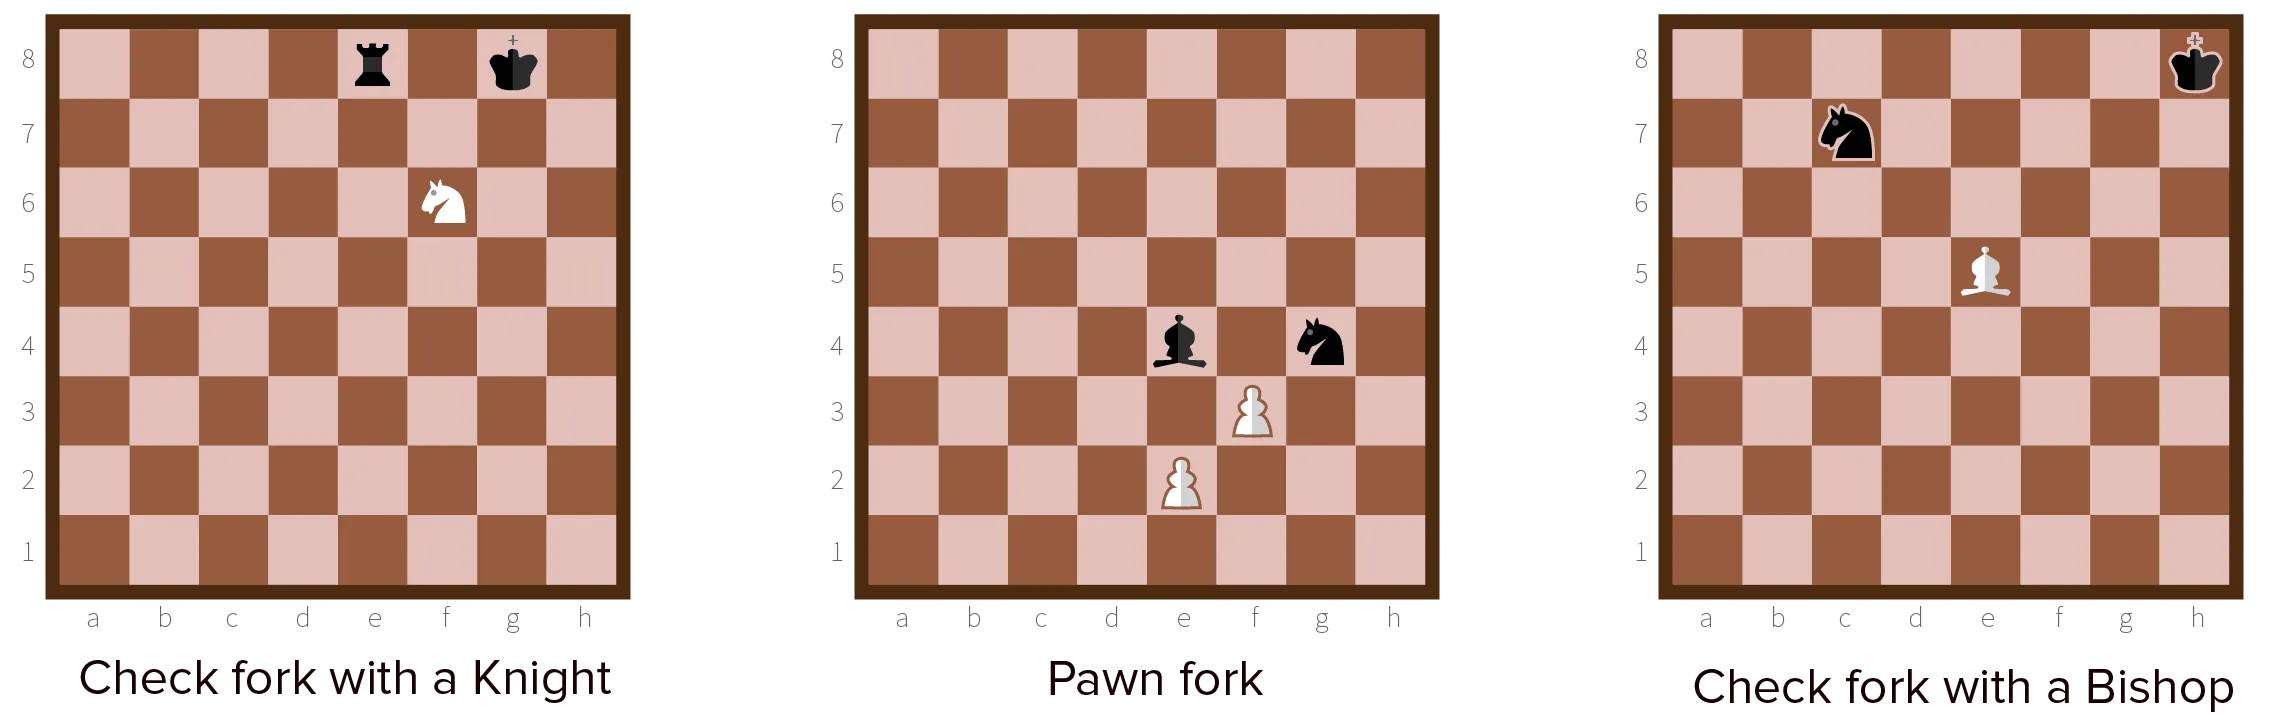 Example of a fork in chess.